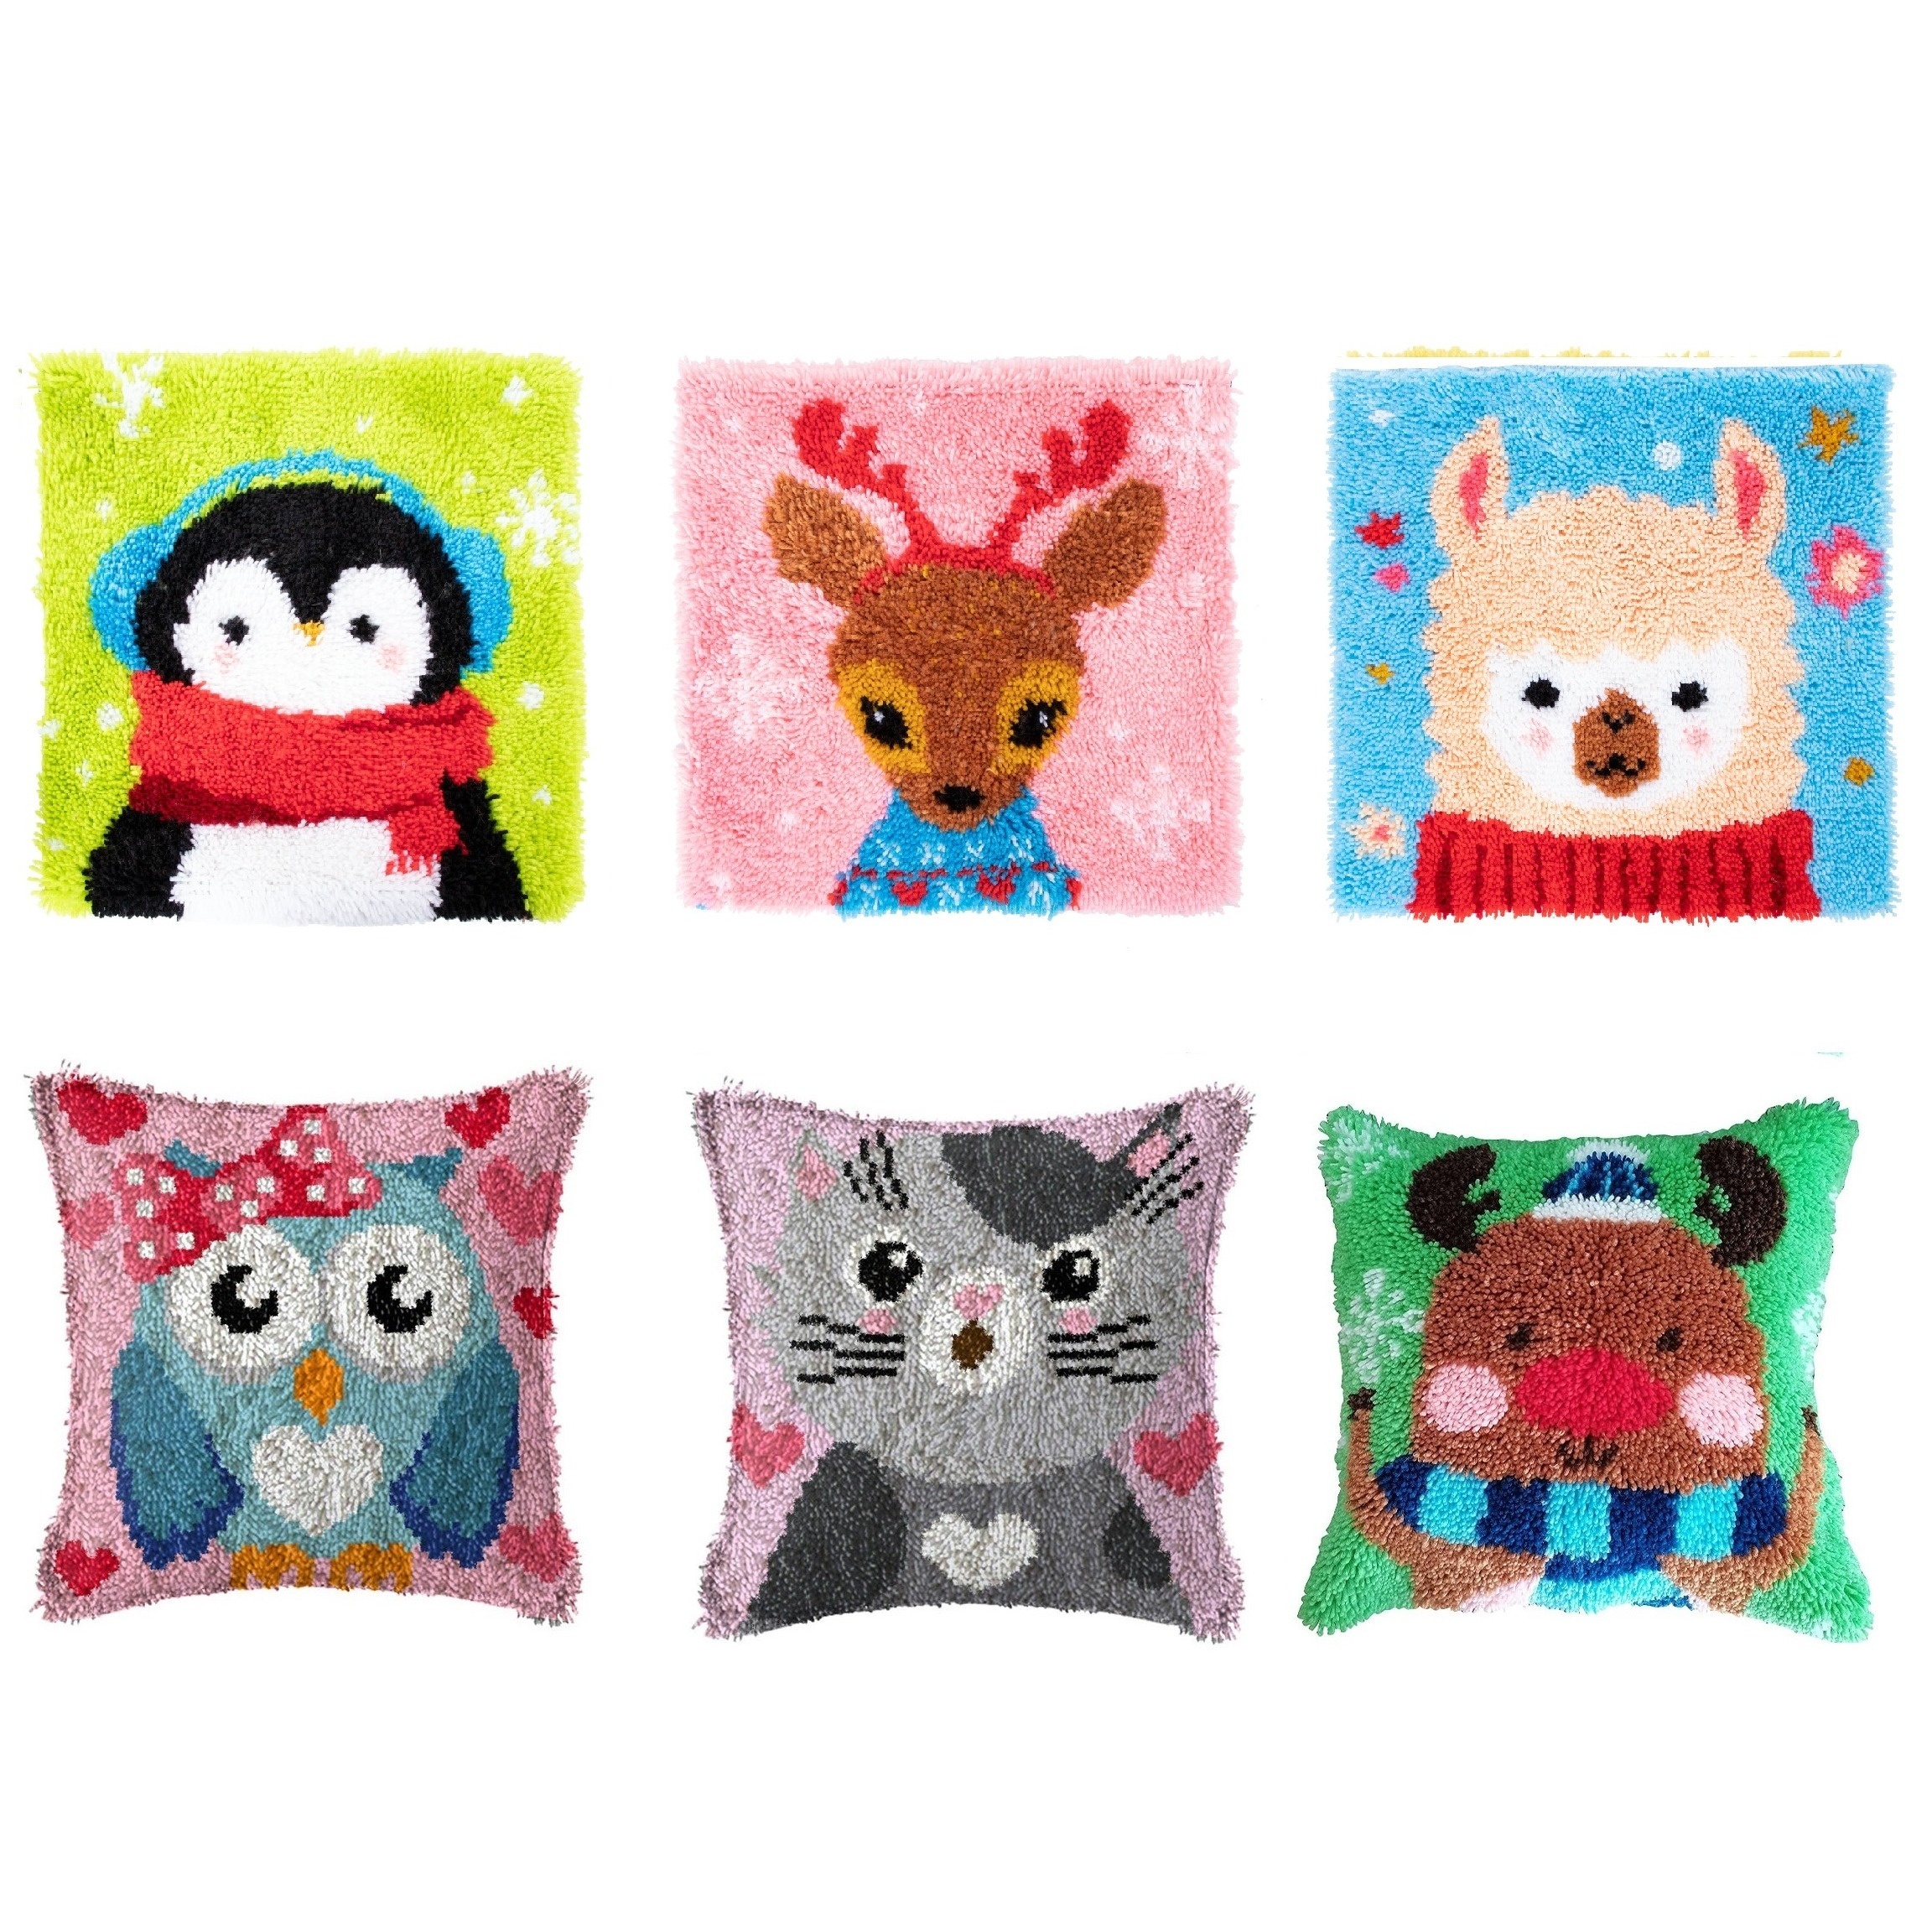 1pc Model Latch Hook Kits, Shaggy Craft For DIY Throw Pillow Cover, Sofa  Cushion Cover, Christmas */Dog/Cat/Bear/Bird With Pattern Printed 16X1